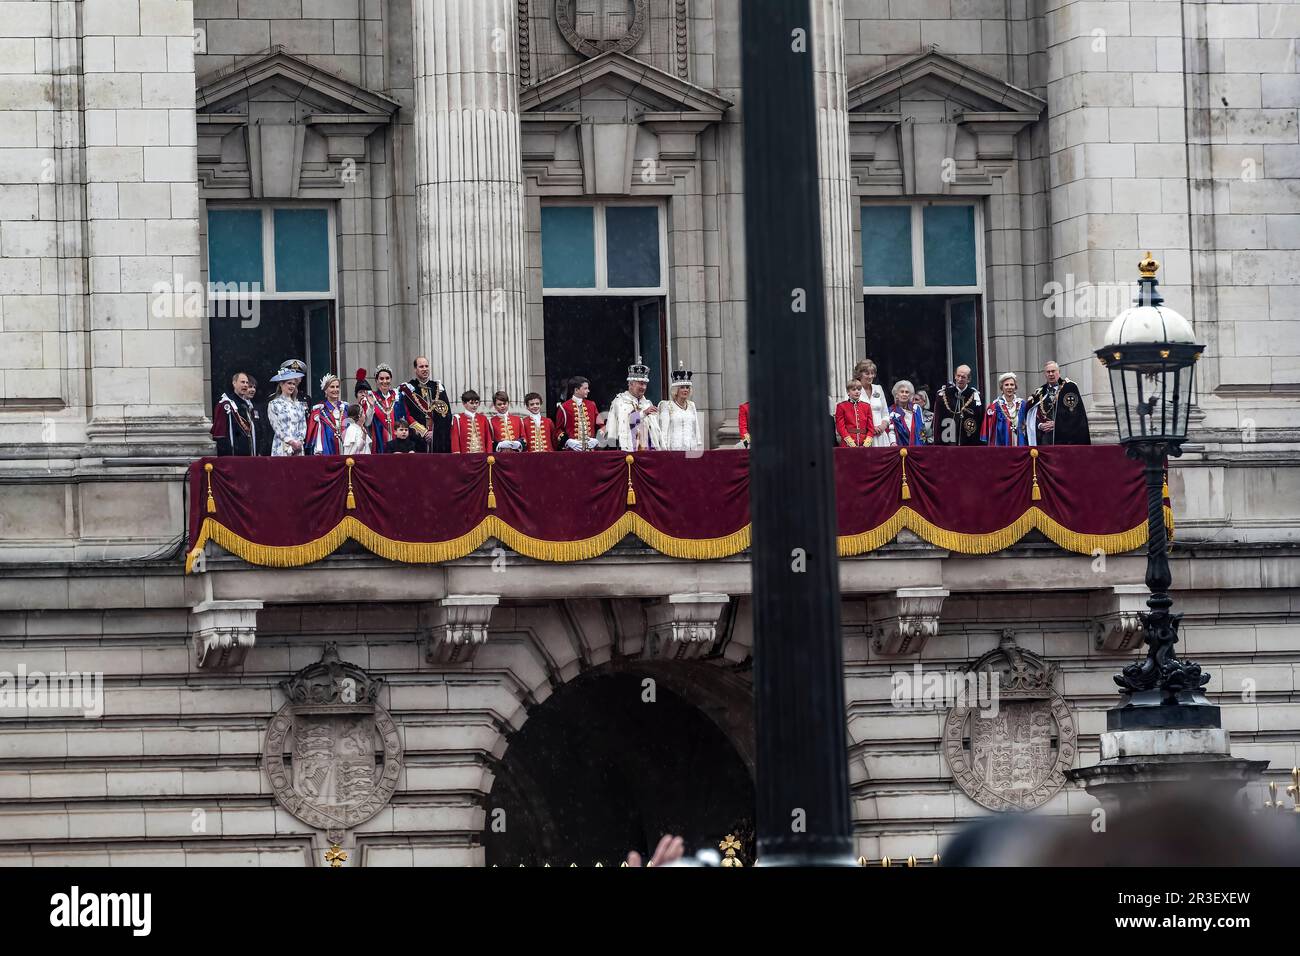 Royal family on the balcony of Buckingham Palace after the Coronation of King Charles III Stock Photo